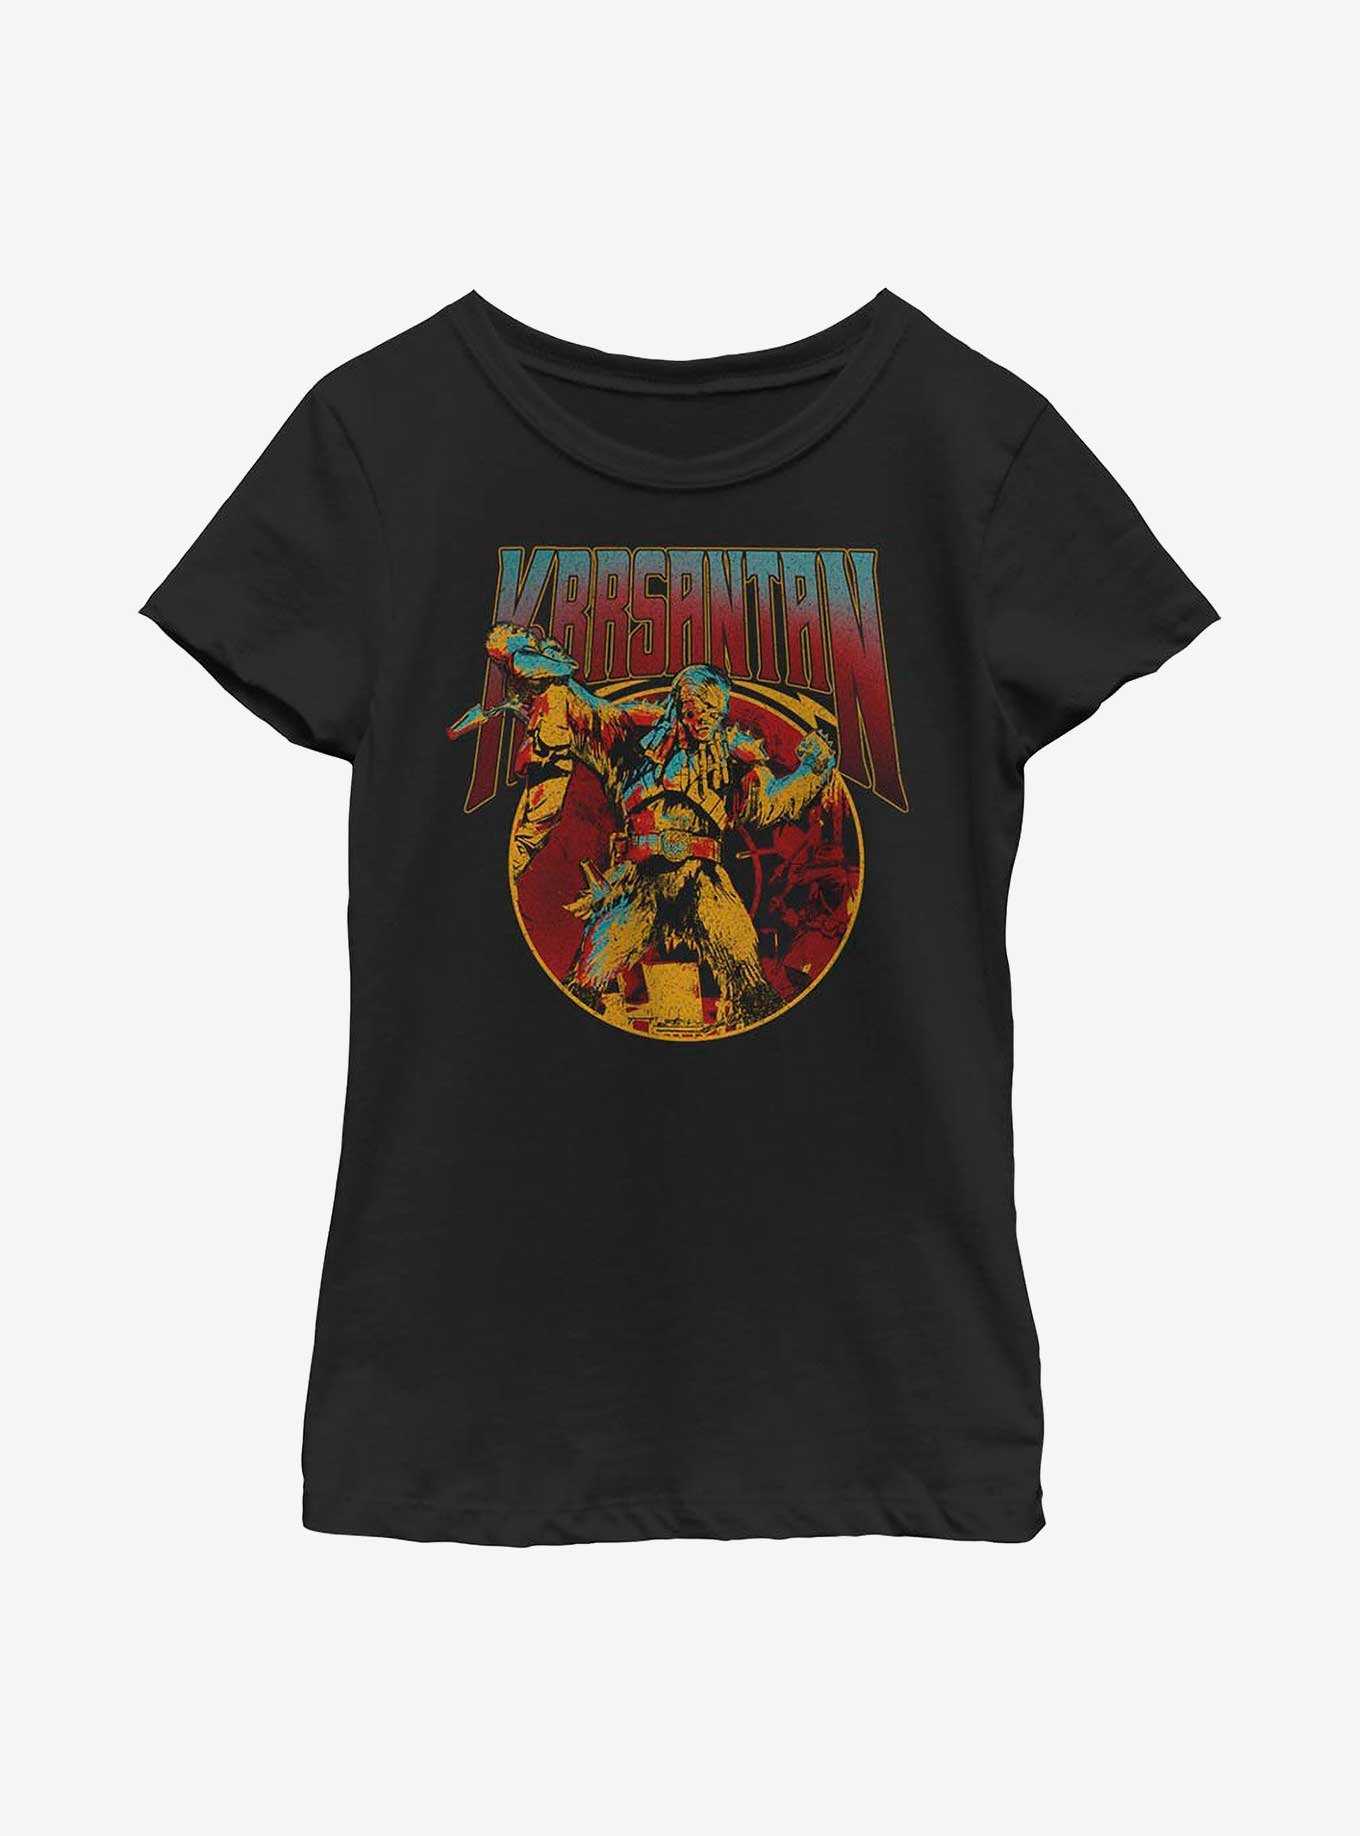 Star Wars Book Of Boba Fett It's Go Time Youth Girls T-Shirt, , hi-res